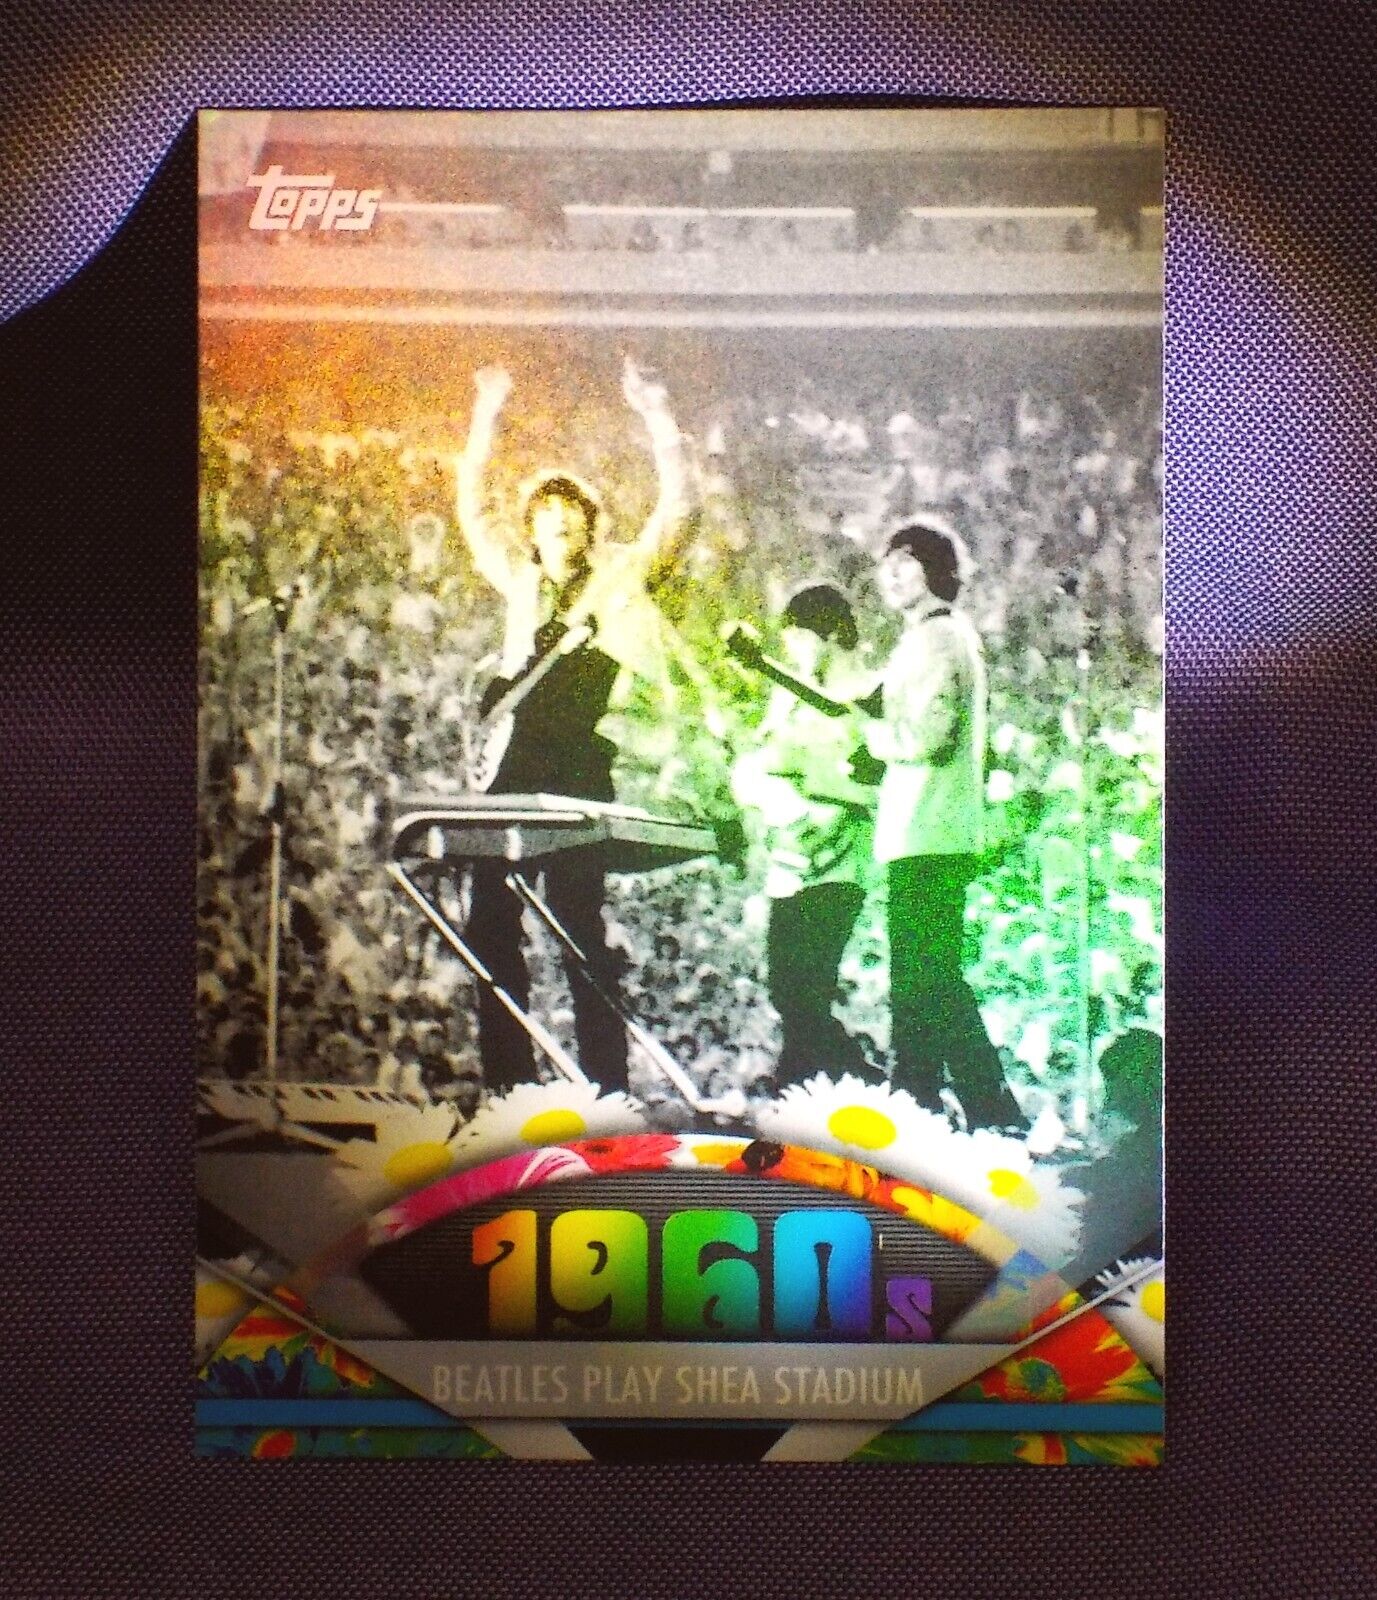 2011 Topps American Pie ♫ Beatles Play Shea Stadium  Limited HOLO FOIL card HTF